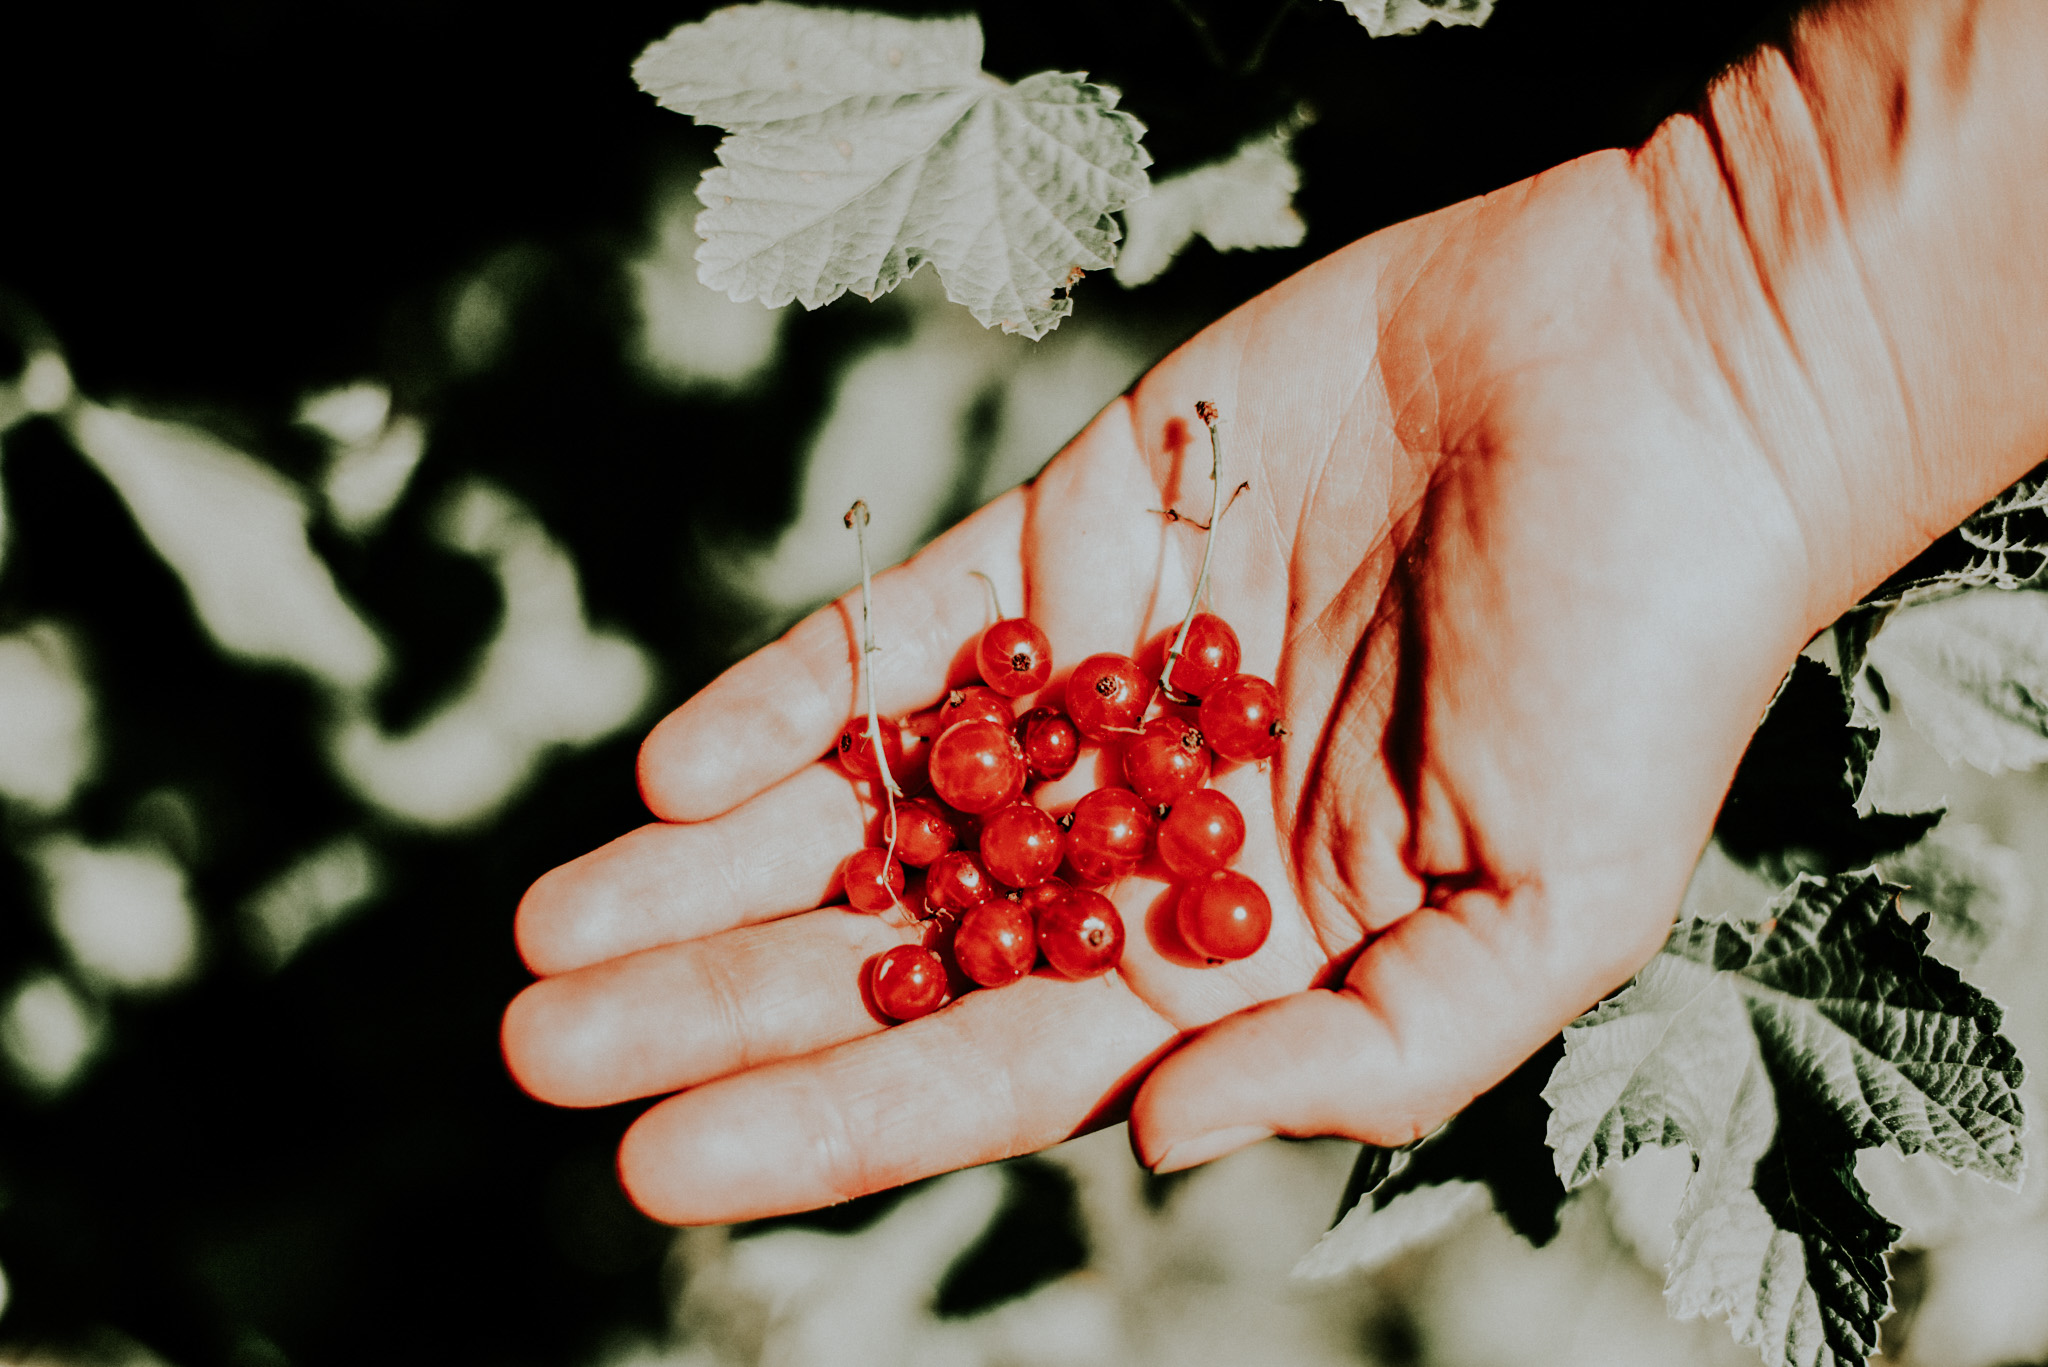 A hand is shown holding a handful of red berries.